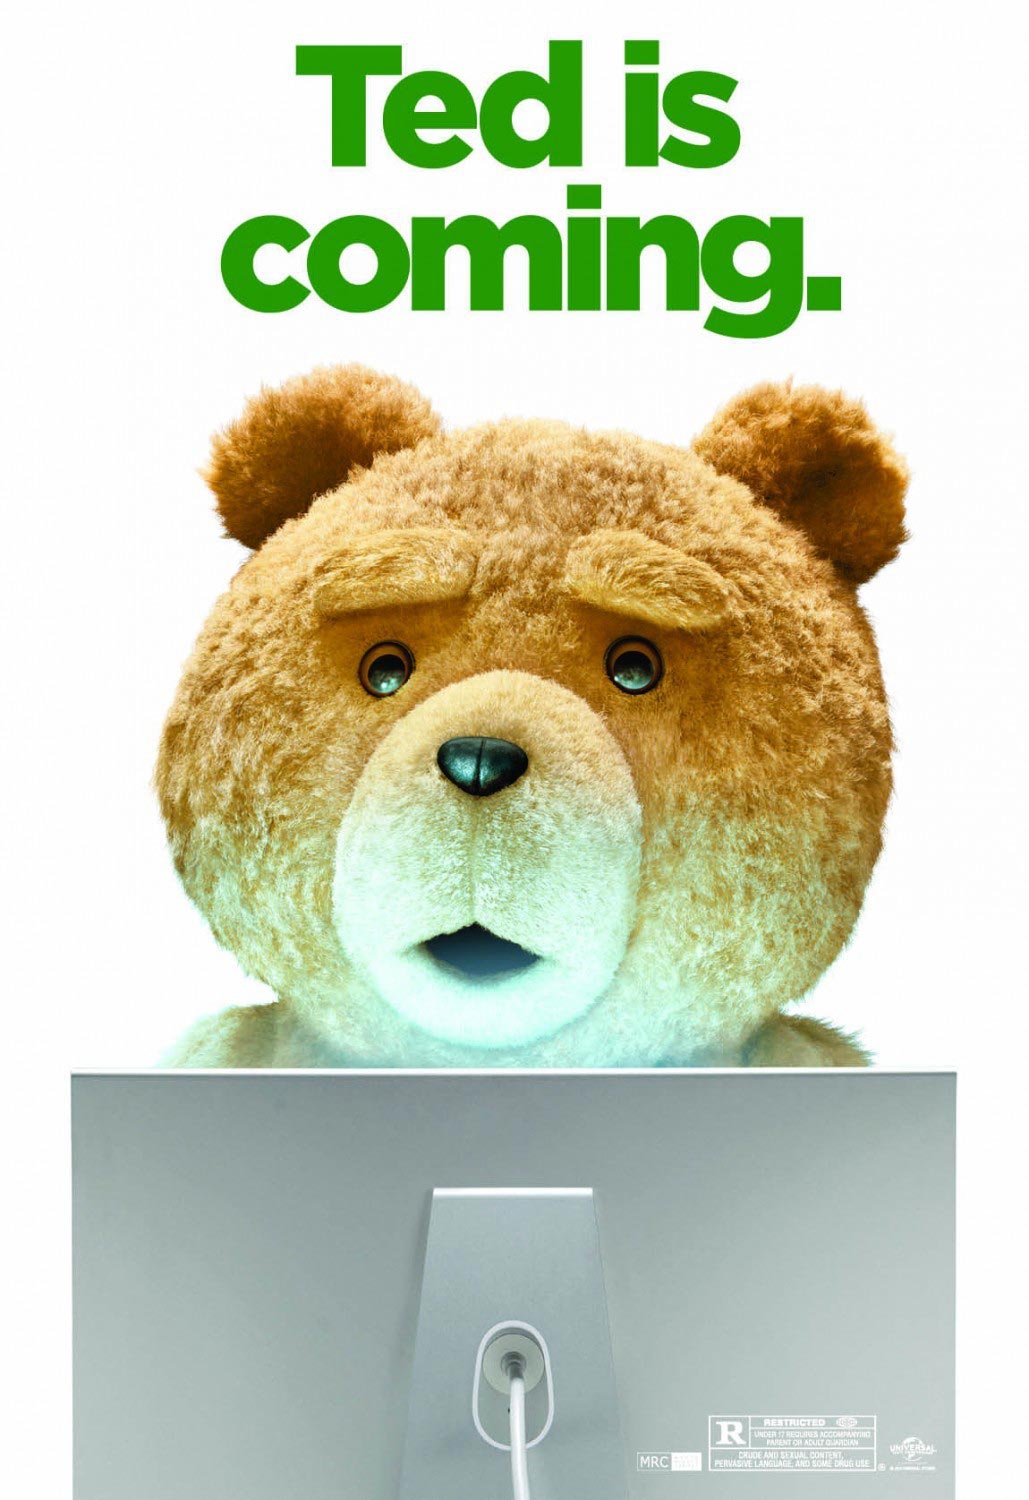 TED poster